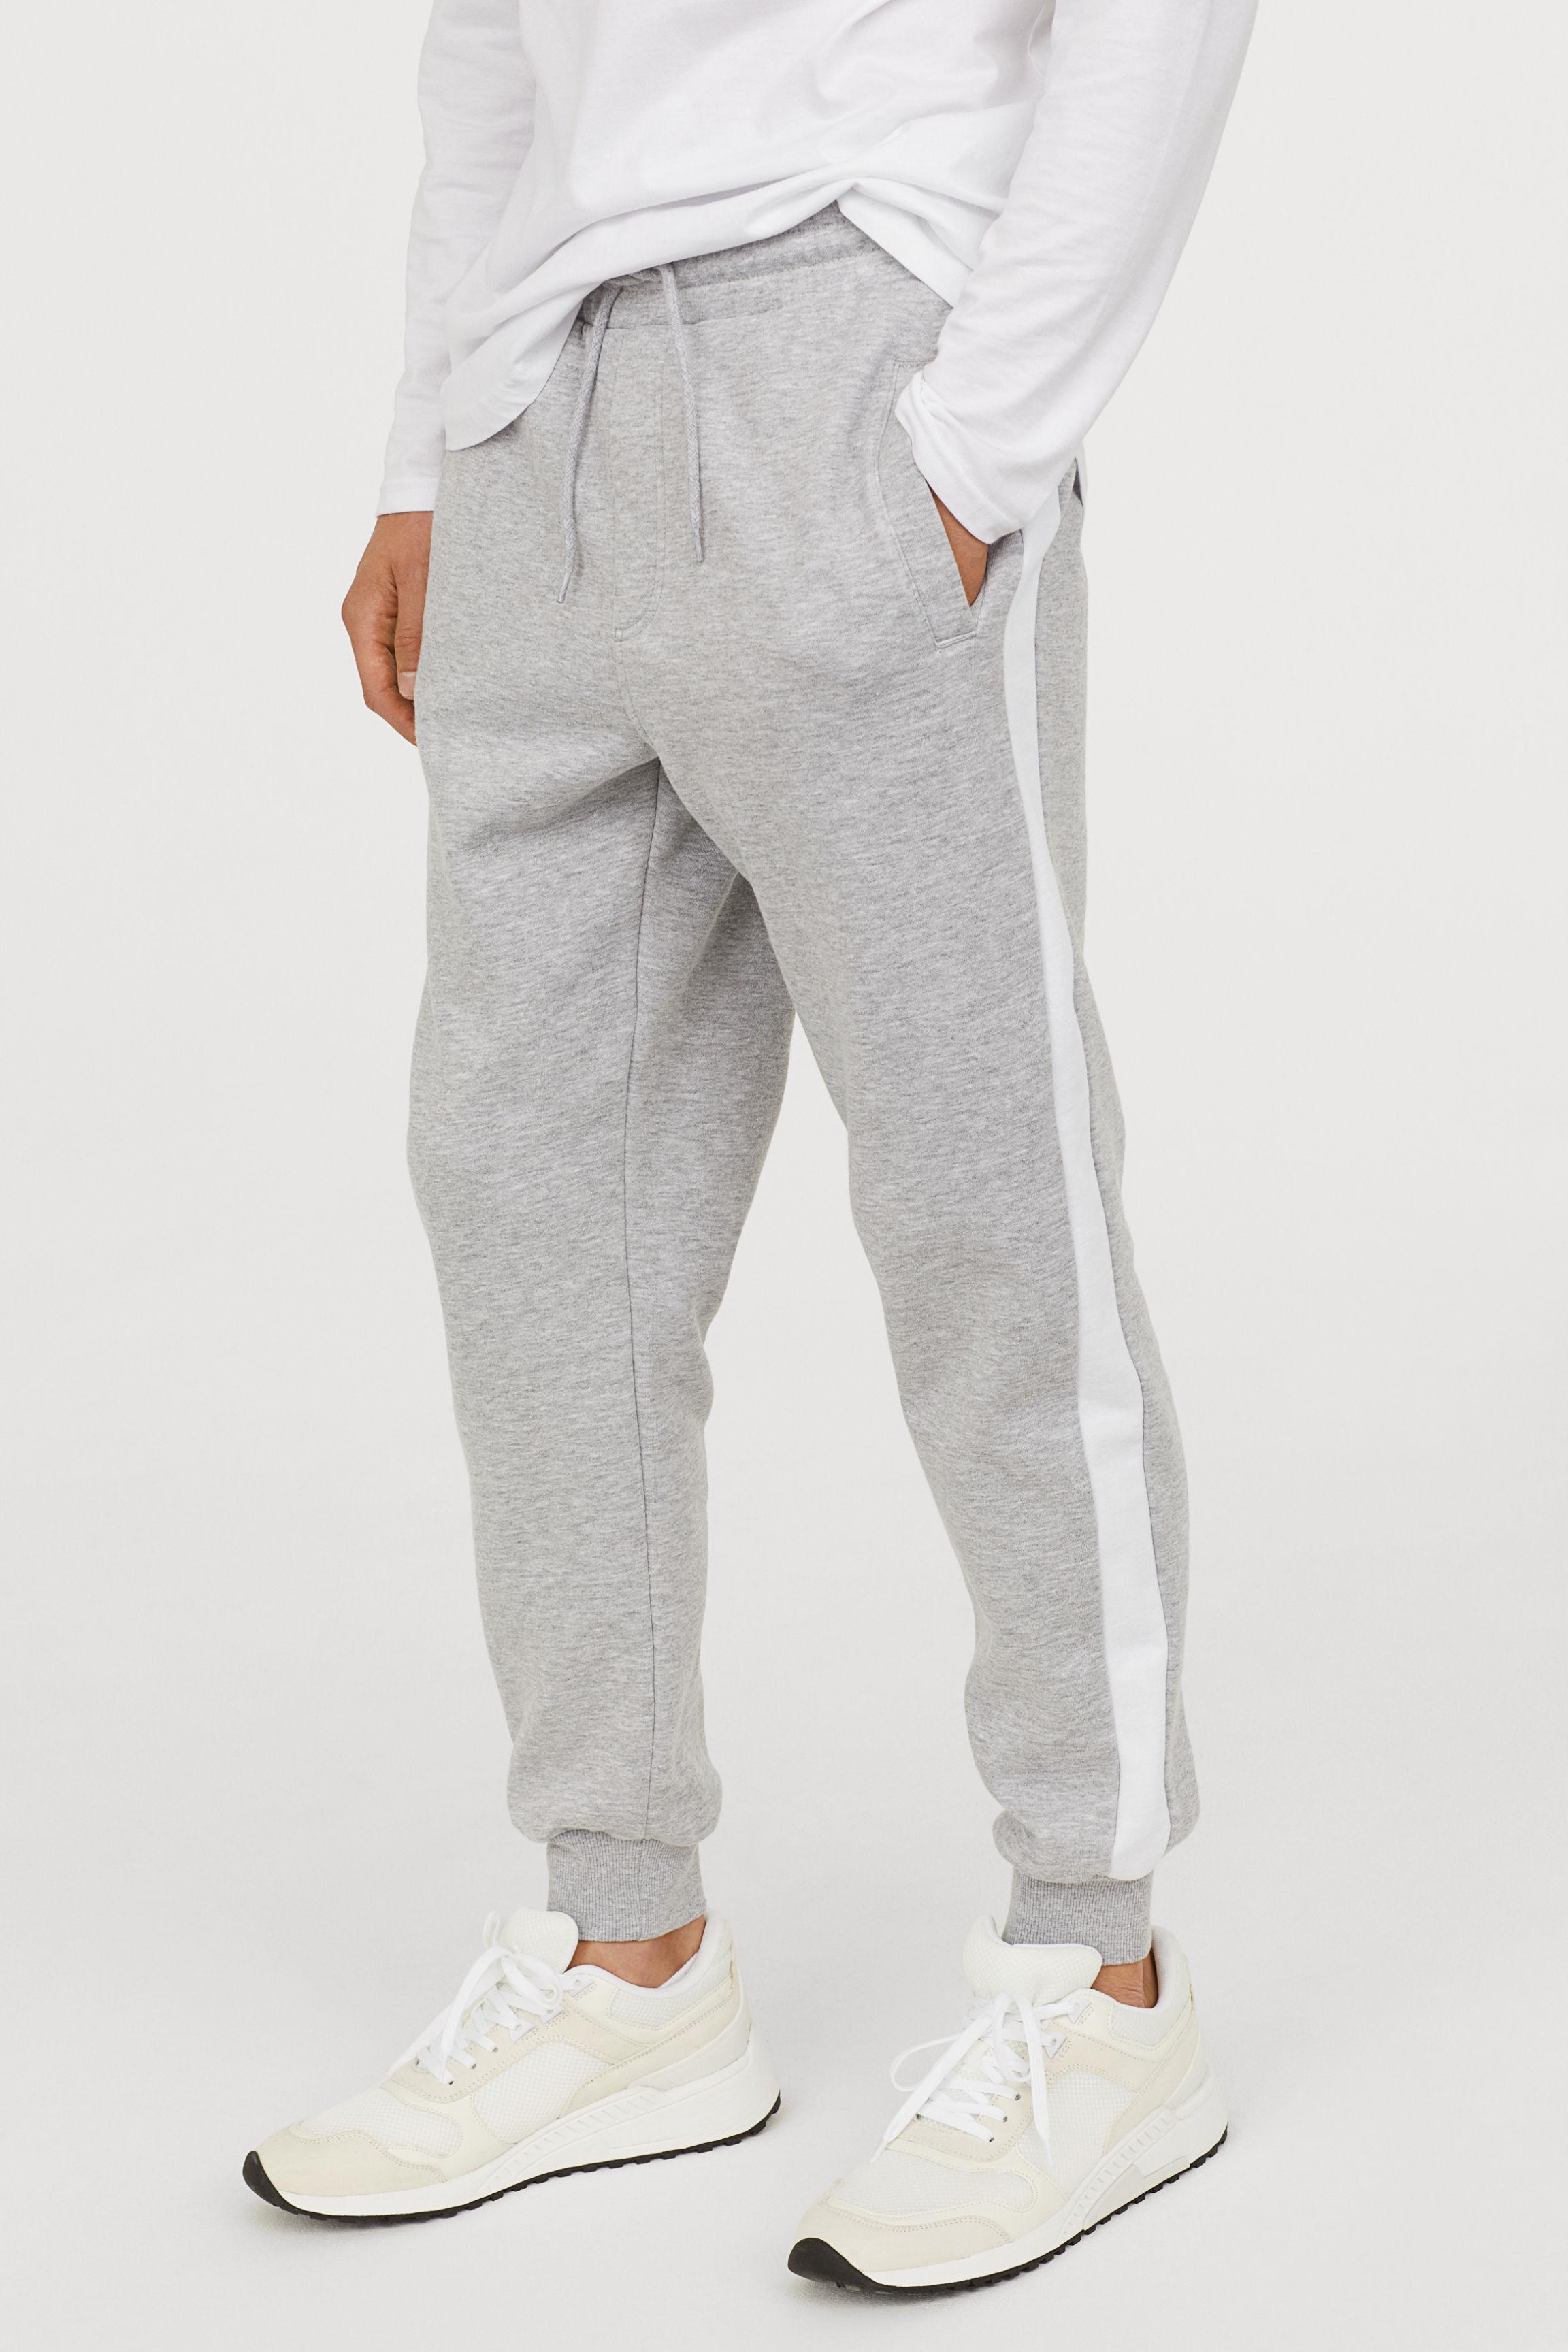 H&M Cotton Joggers With Side Stripes in Grey Marl (Grey) for Men - Lyst